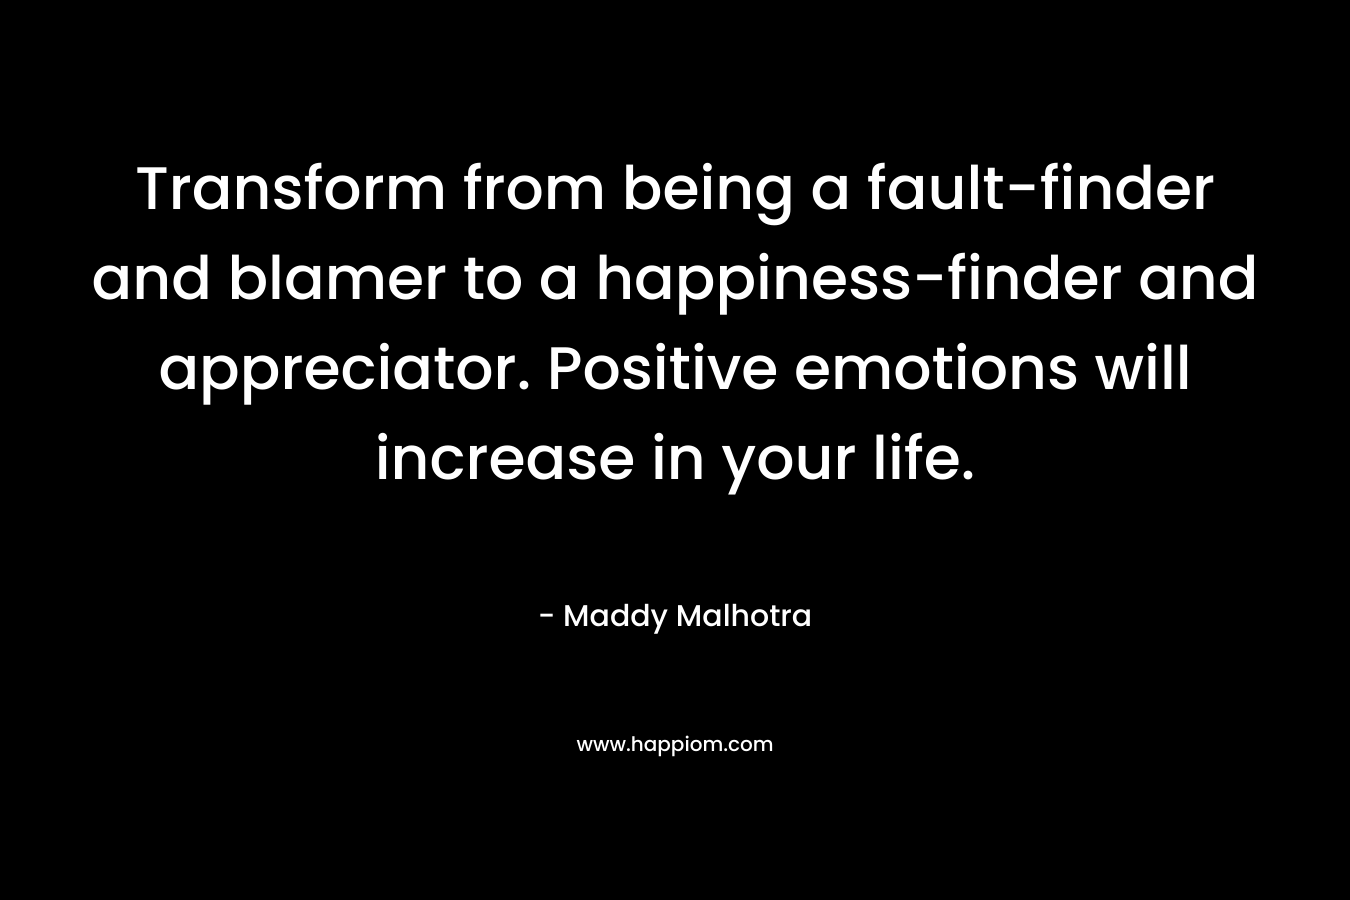 Transform from being a fault-finder and blamer to a happiness-finder and appreciator. Positive emotions will increase in your life.